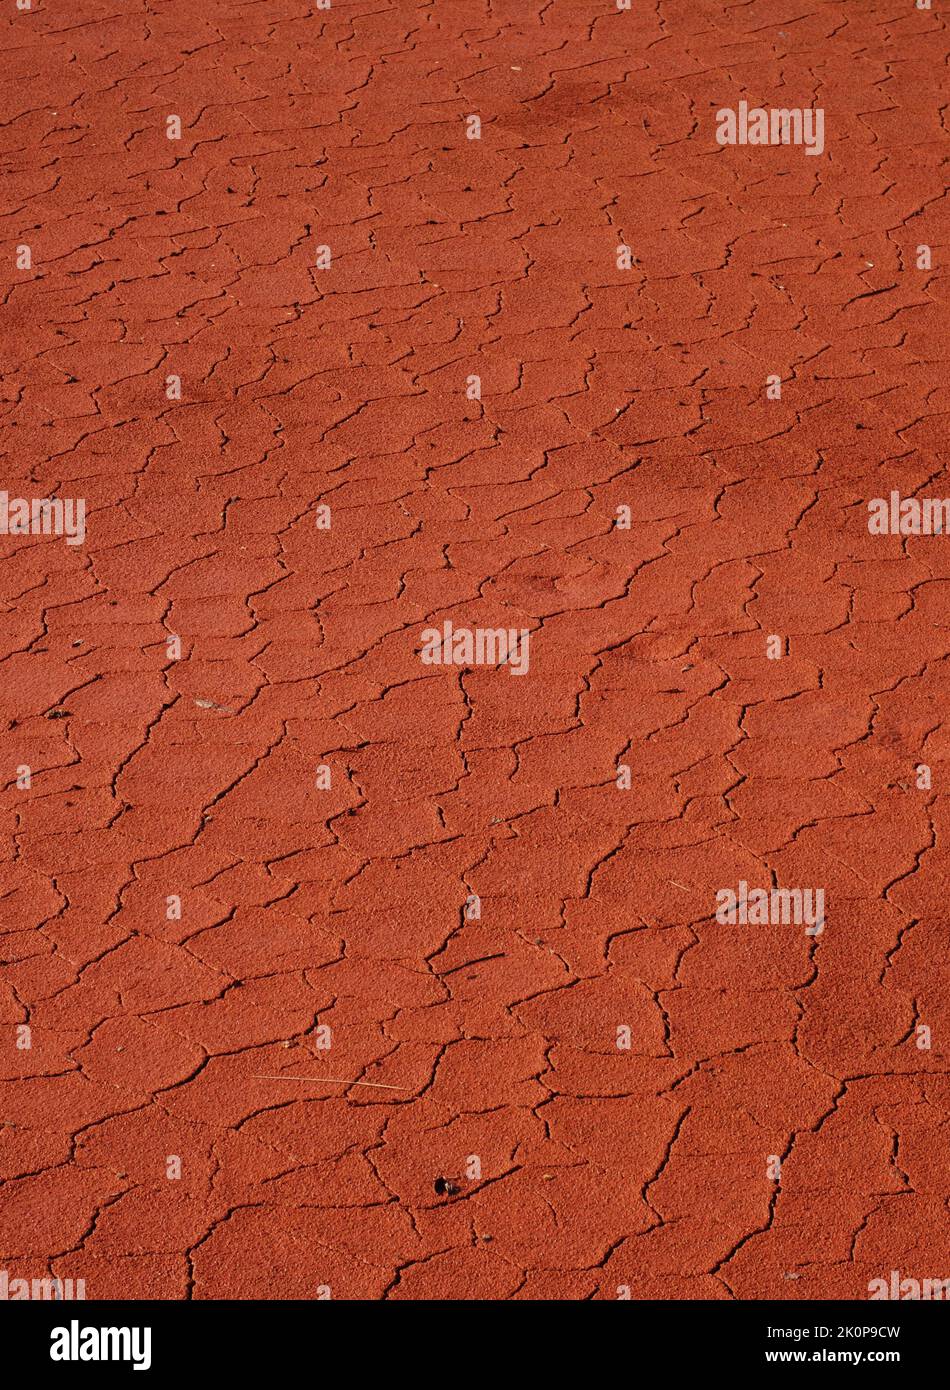 cracked and dry red ground, global warming concept Stock Photo